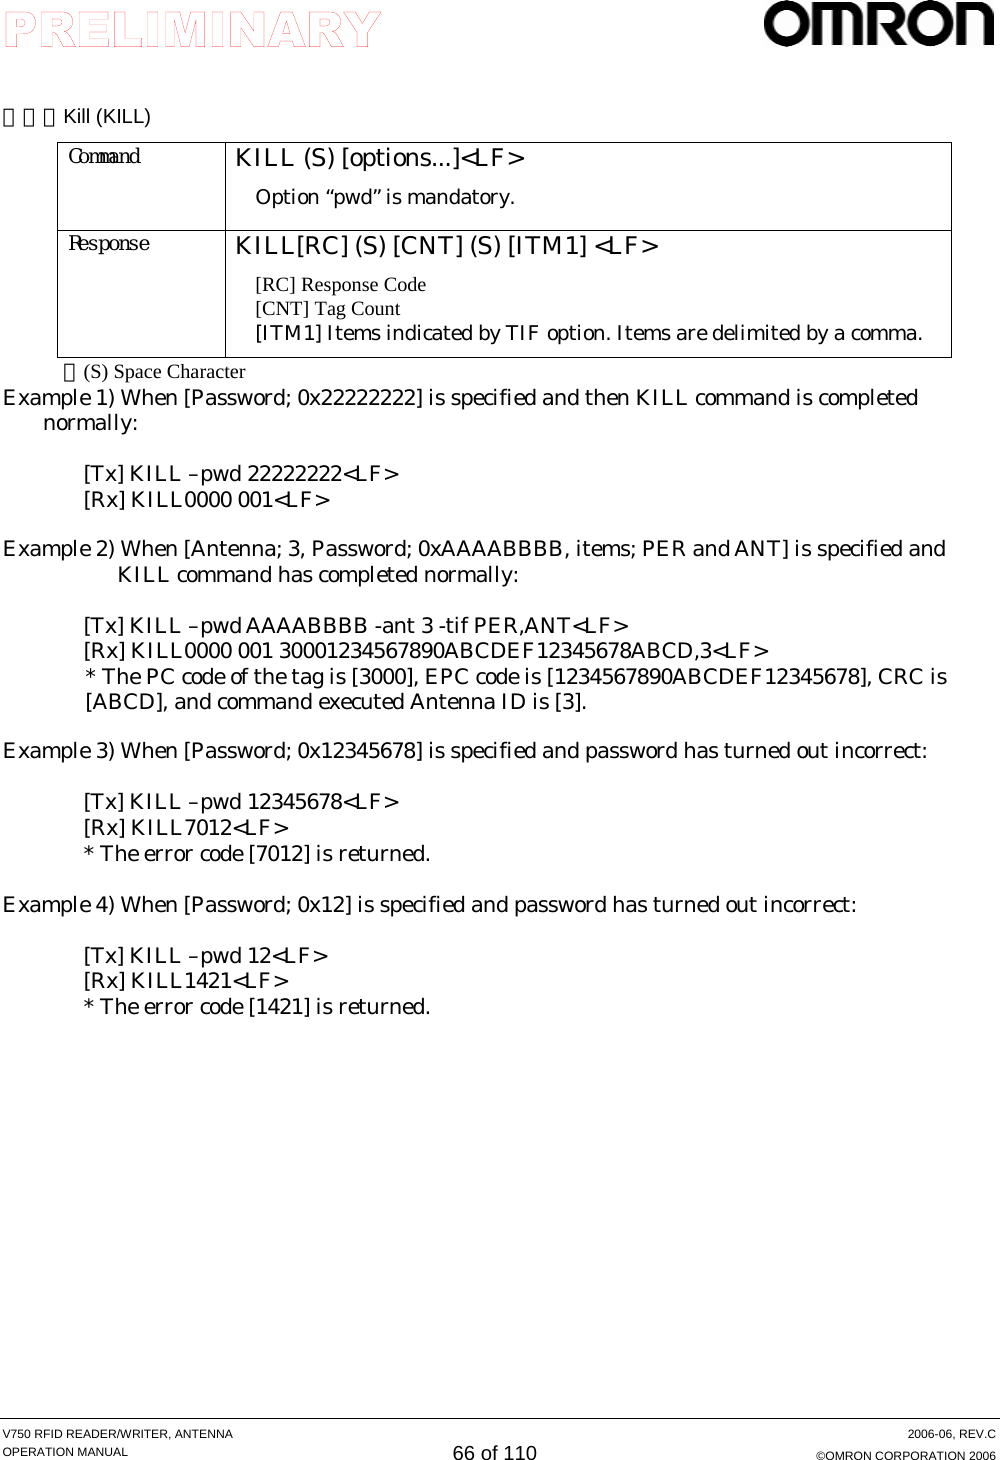     V750 RFID READER/WRITER, ANTENNA  2006-06, REV.C OPERATION MANUAL 66 of 110  ©OMRON CORPORATION 2006  （６）Kill (KILL) Command  KILL (S) [options...]&lt;LF&gt; Option “pwd” is mandatory.  Response  KILL[RC] (S) [CNT] (S) [ITM1] &lt;LF&gt; [RC] Response Code [CNT] Tag Count [ITM1] Items indicated by TIF option. Items are delimited by a comma. ＊(S) Space Character Example 1) When [Password; 0x22222222] is specified and then KILL command is completed normally:   [Tx] KILL –pwd 22222222&lt;LF&gt; [Rx] KILL0000 001&lt;LF&gt;  Example 2) When [Antenna; 3, Password; 0xAAAABBBB, items; PER and ANT] is specified and KILL command has completed normally:   [Tx] KILL –pwd AAAABBBB -ant 3 -tif PER,ANT&lt;LF&gt; [Rx] KILL0000 001 30001234567890ABCDEF12345678ABCD,3&lt;LF&gt; * The PC code of the tag is [3000], EPC code is [1234567890ABCDEF12345678], CRC is [ABCD], and command executed Antenna ID is [3].   Example 3) When [Password; 0x12345678] is specified and password has turned out incorrect:   [Tx] KILL –pwd 12345678&lt;LF&gt; [Rx] KILL7012&lt;LF&gt; * The error code [7012] is returned.  Example 4) When [Password; 0x12] is specified and password has turned out incorrect:  [Tx] KILL –pwd 12&lt;LF&gt; [Rx] KILL1421&lt;LF&gt; * The error code [1421] is returned.  